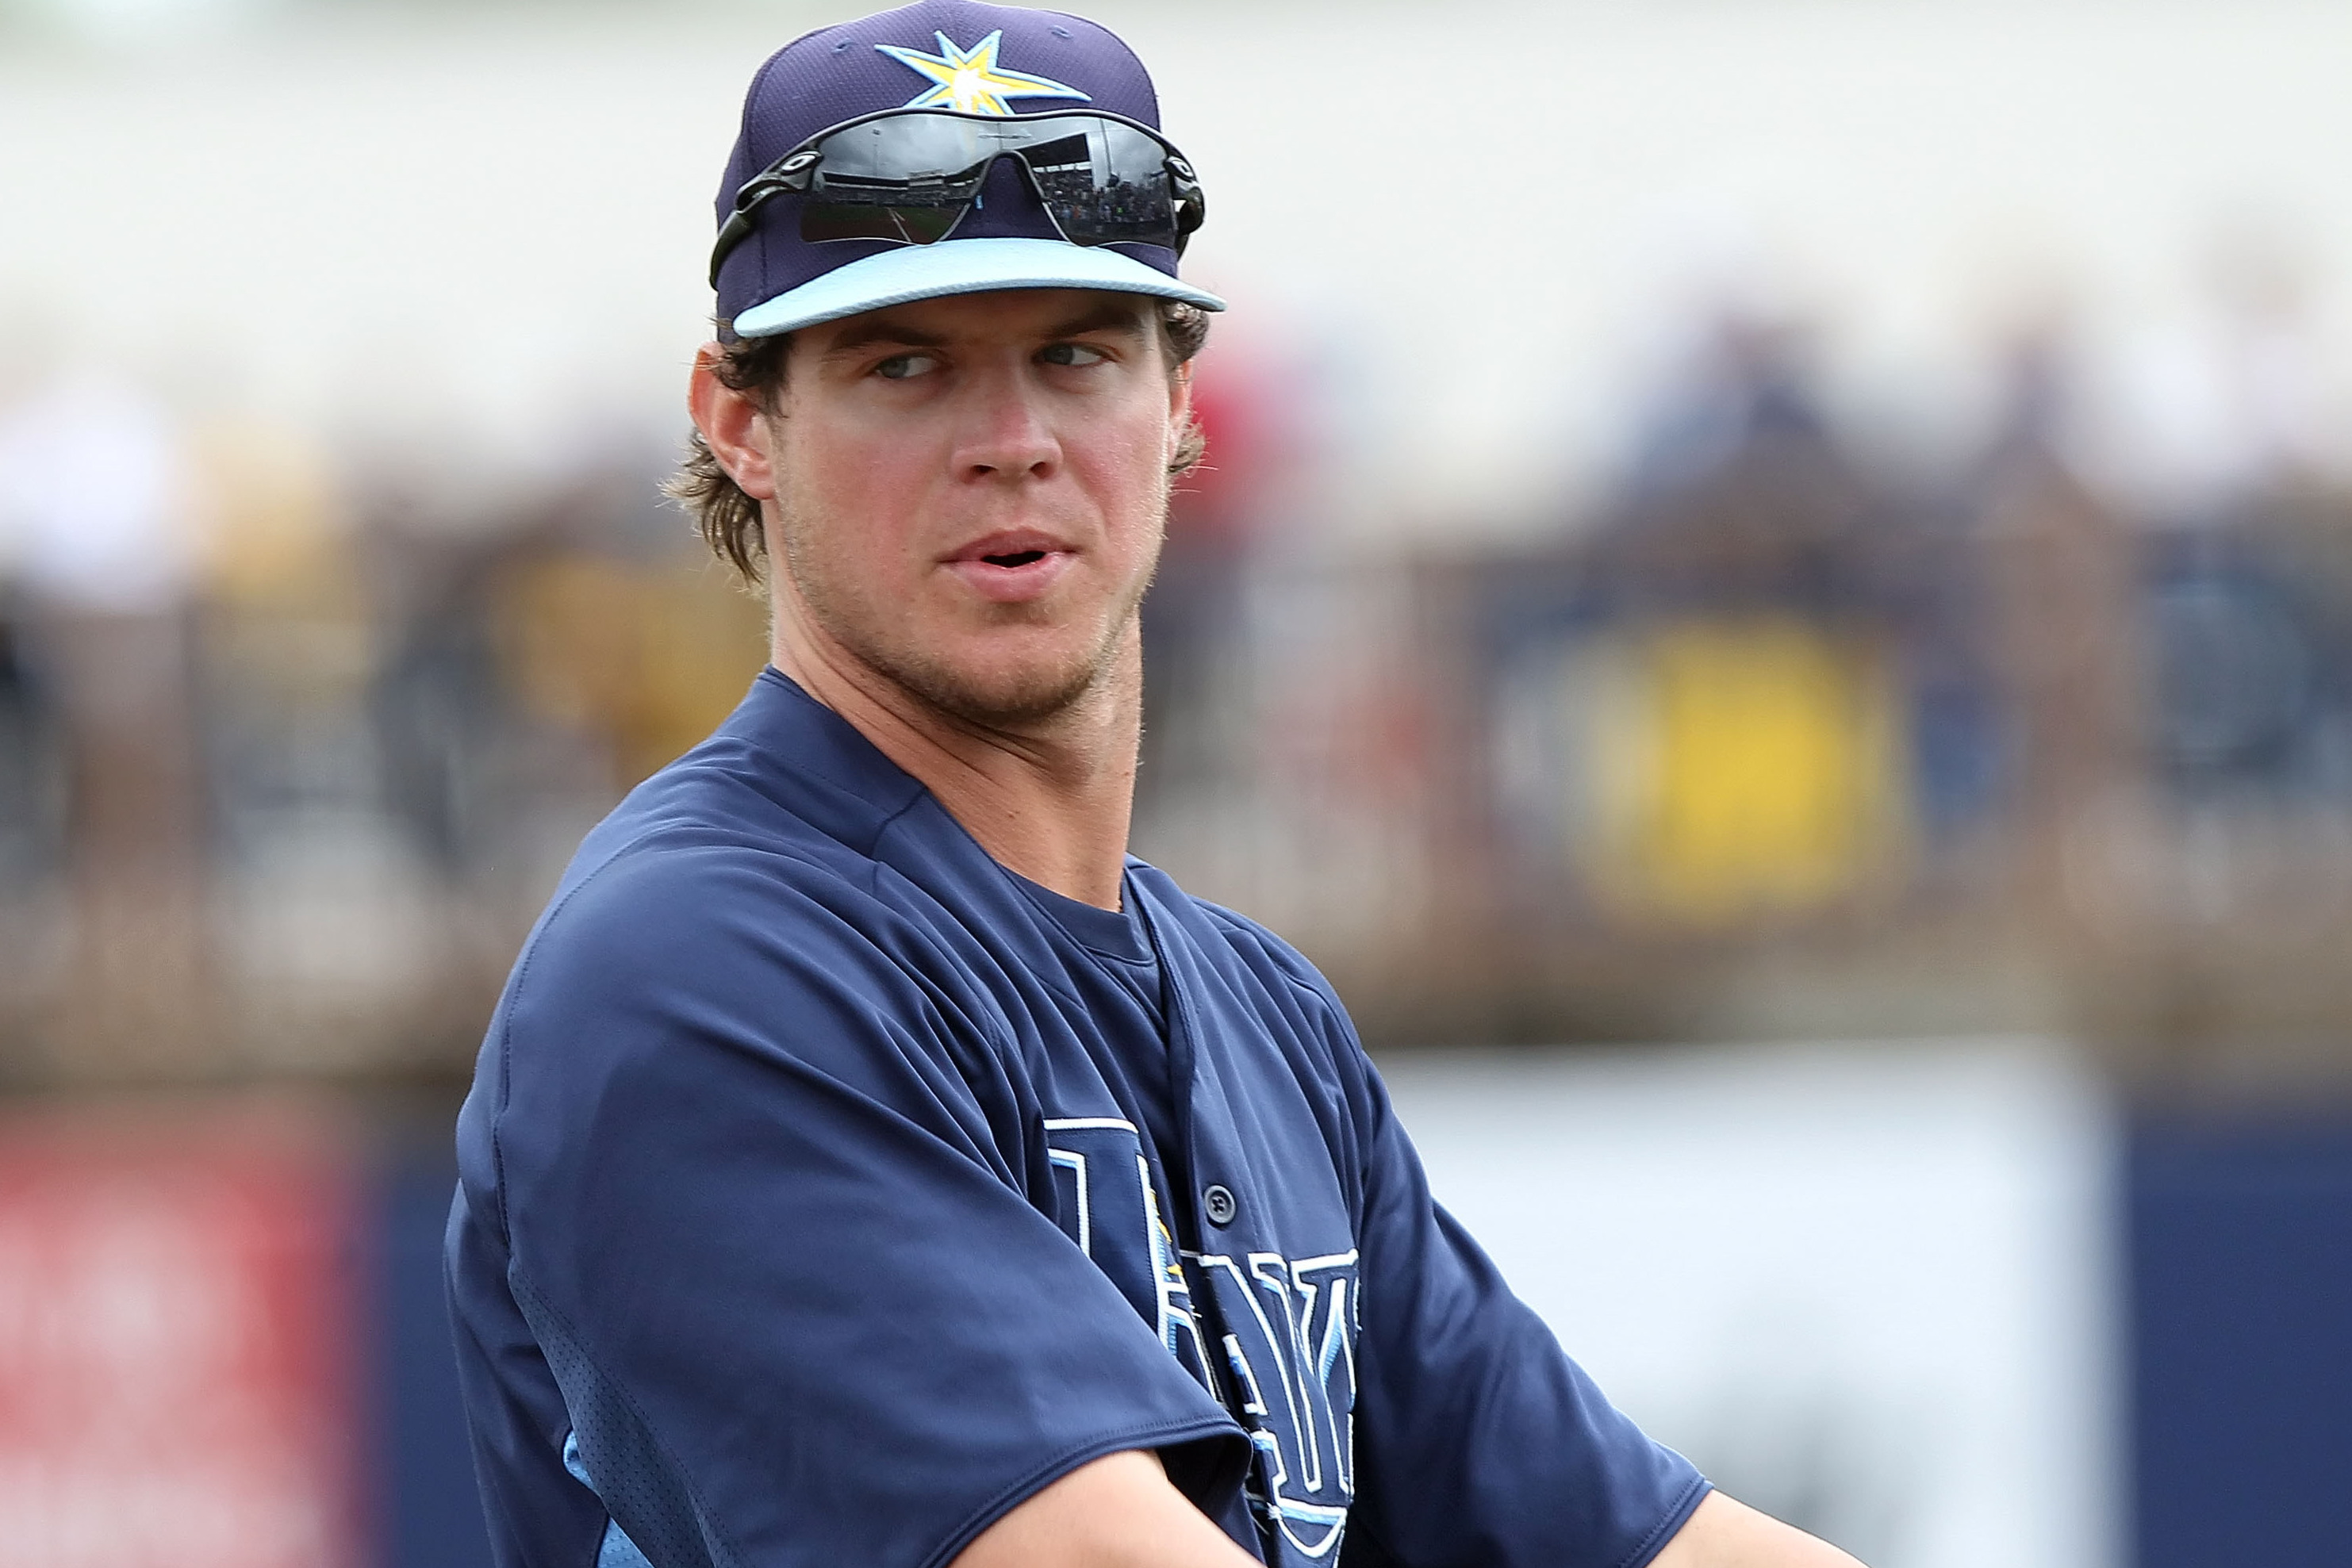 Why the Rays traded Wil Myers (and why it's fascinating